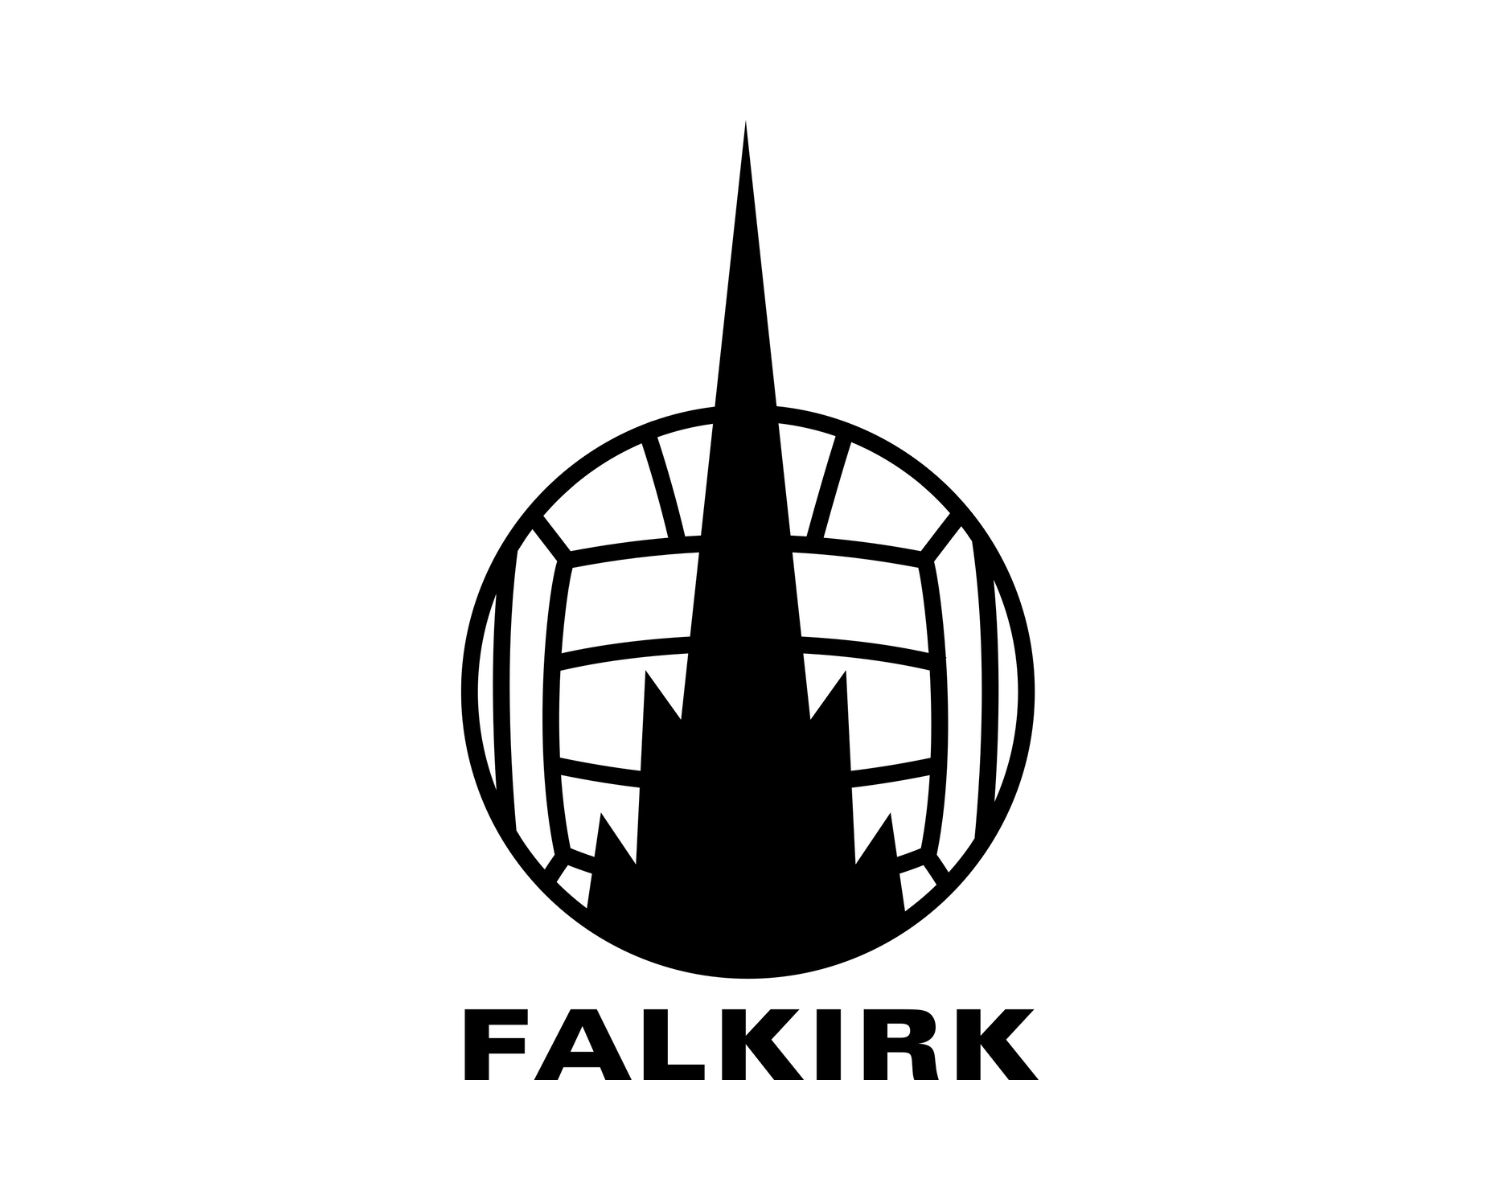 Falkirk FC: 14 Football Club Facts - Facts.net